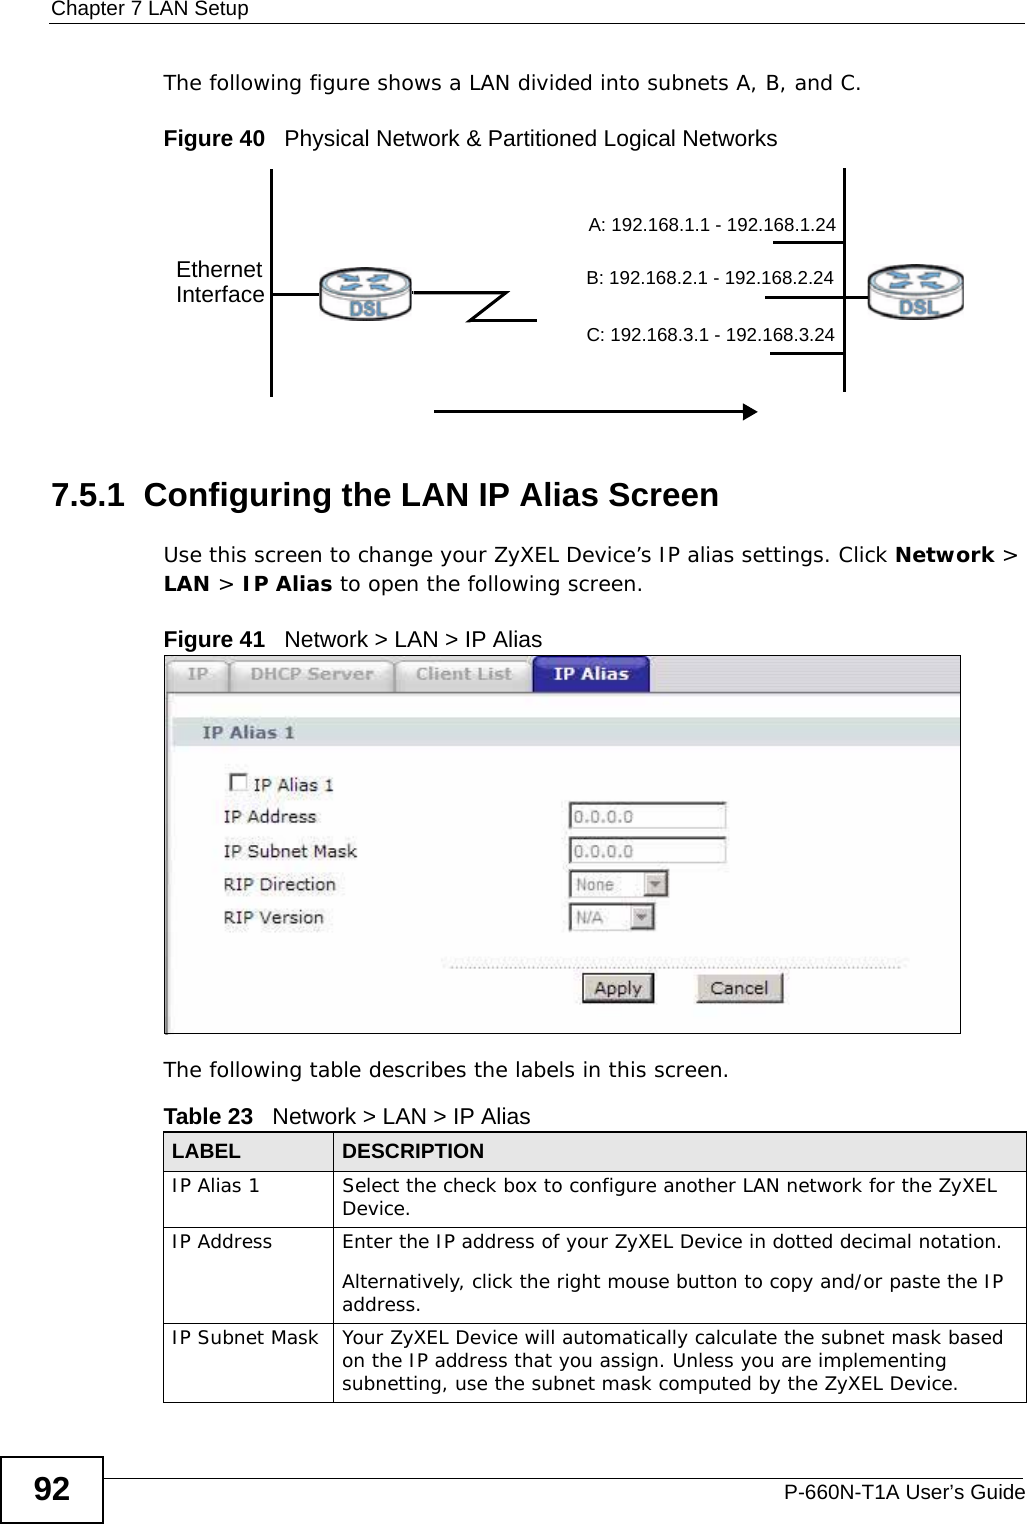 Chapter 7 LAN SetupP-660N-T1A User’s Guide92The following figure shows a LAN divided into subnets A, B, and C.Figure 40   Physical Network &amp; Partitioned Logical Networks7.5.1  Configuring the LAN IP Alias ScreenUse this screen to change your ZyXEL Device’s IP alias settings. Click Network &gt; LAN &gt; IP Alias to open the following screen.Figure 41   Network &gt; LAN &gt; IP AliasThe following table describes the labels in this screen. EthernetInterfaceA: 192.168.1.1 - 192.168.1.24B: 192.168.2.1 - 192.168.2.24C: 192.168.3.1 - 192.168.3.24Table 23   Network &gt; LAN &gt; IP Alias LABEL DESCRIPTIONIP Alias 1 Select the check box to configure another LAN network for the ZyXEL Device.IP Address Enter the IP address of your ZyXEL Device in dotted decimal notation. Alternatively, click the right mouse button to copy and/or paste the IP address.IP Subnet Mask Your ZyXEL Device will automatically calculate the subnet mask based on the IP address that you assign. Unless you are implementing subnetting, use the subnet mask computed by the ZyXEL Device.